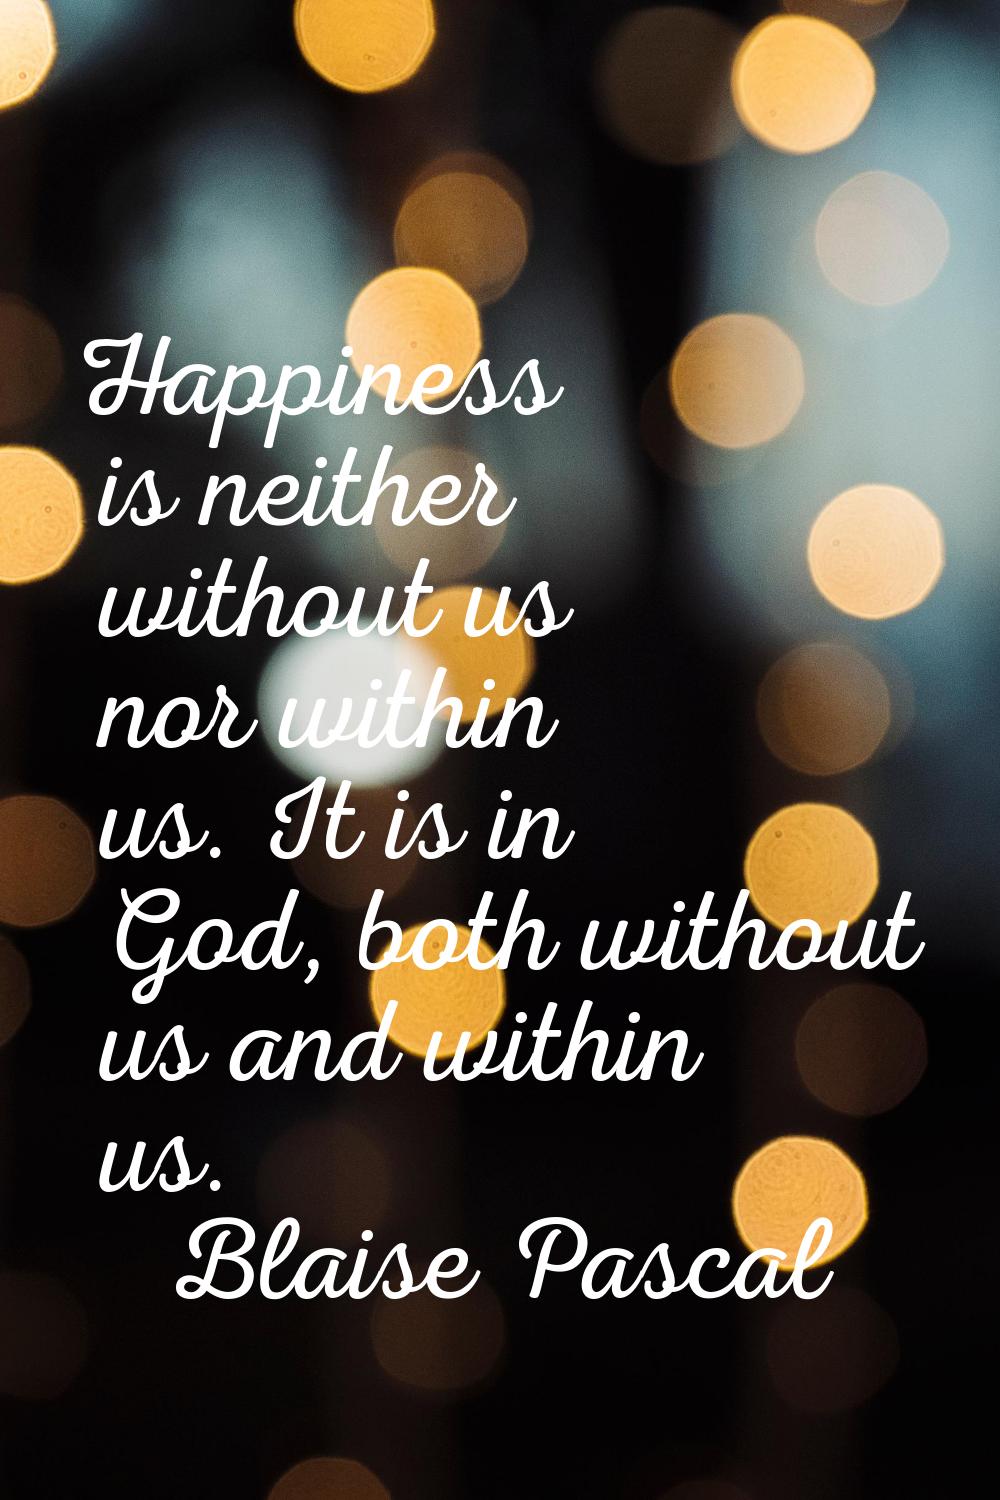 Happiness is neither without us nor within us. It is in God, both without us and within us.